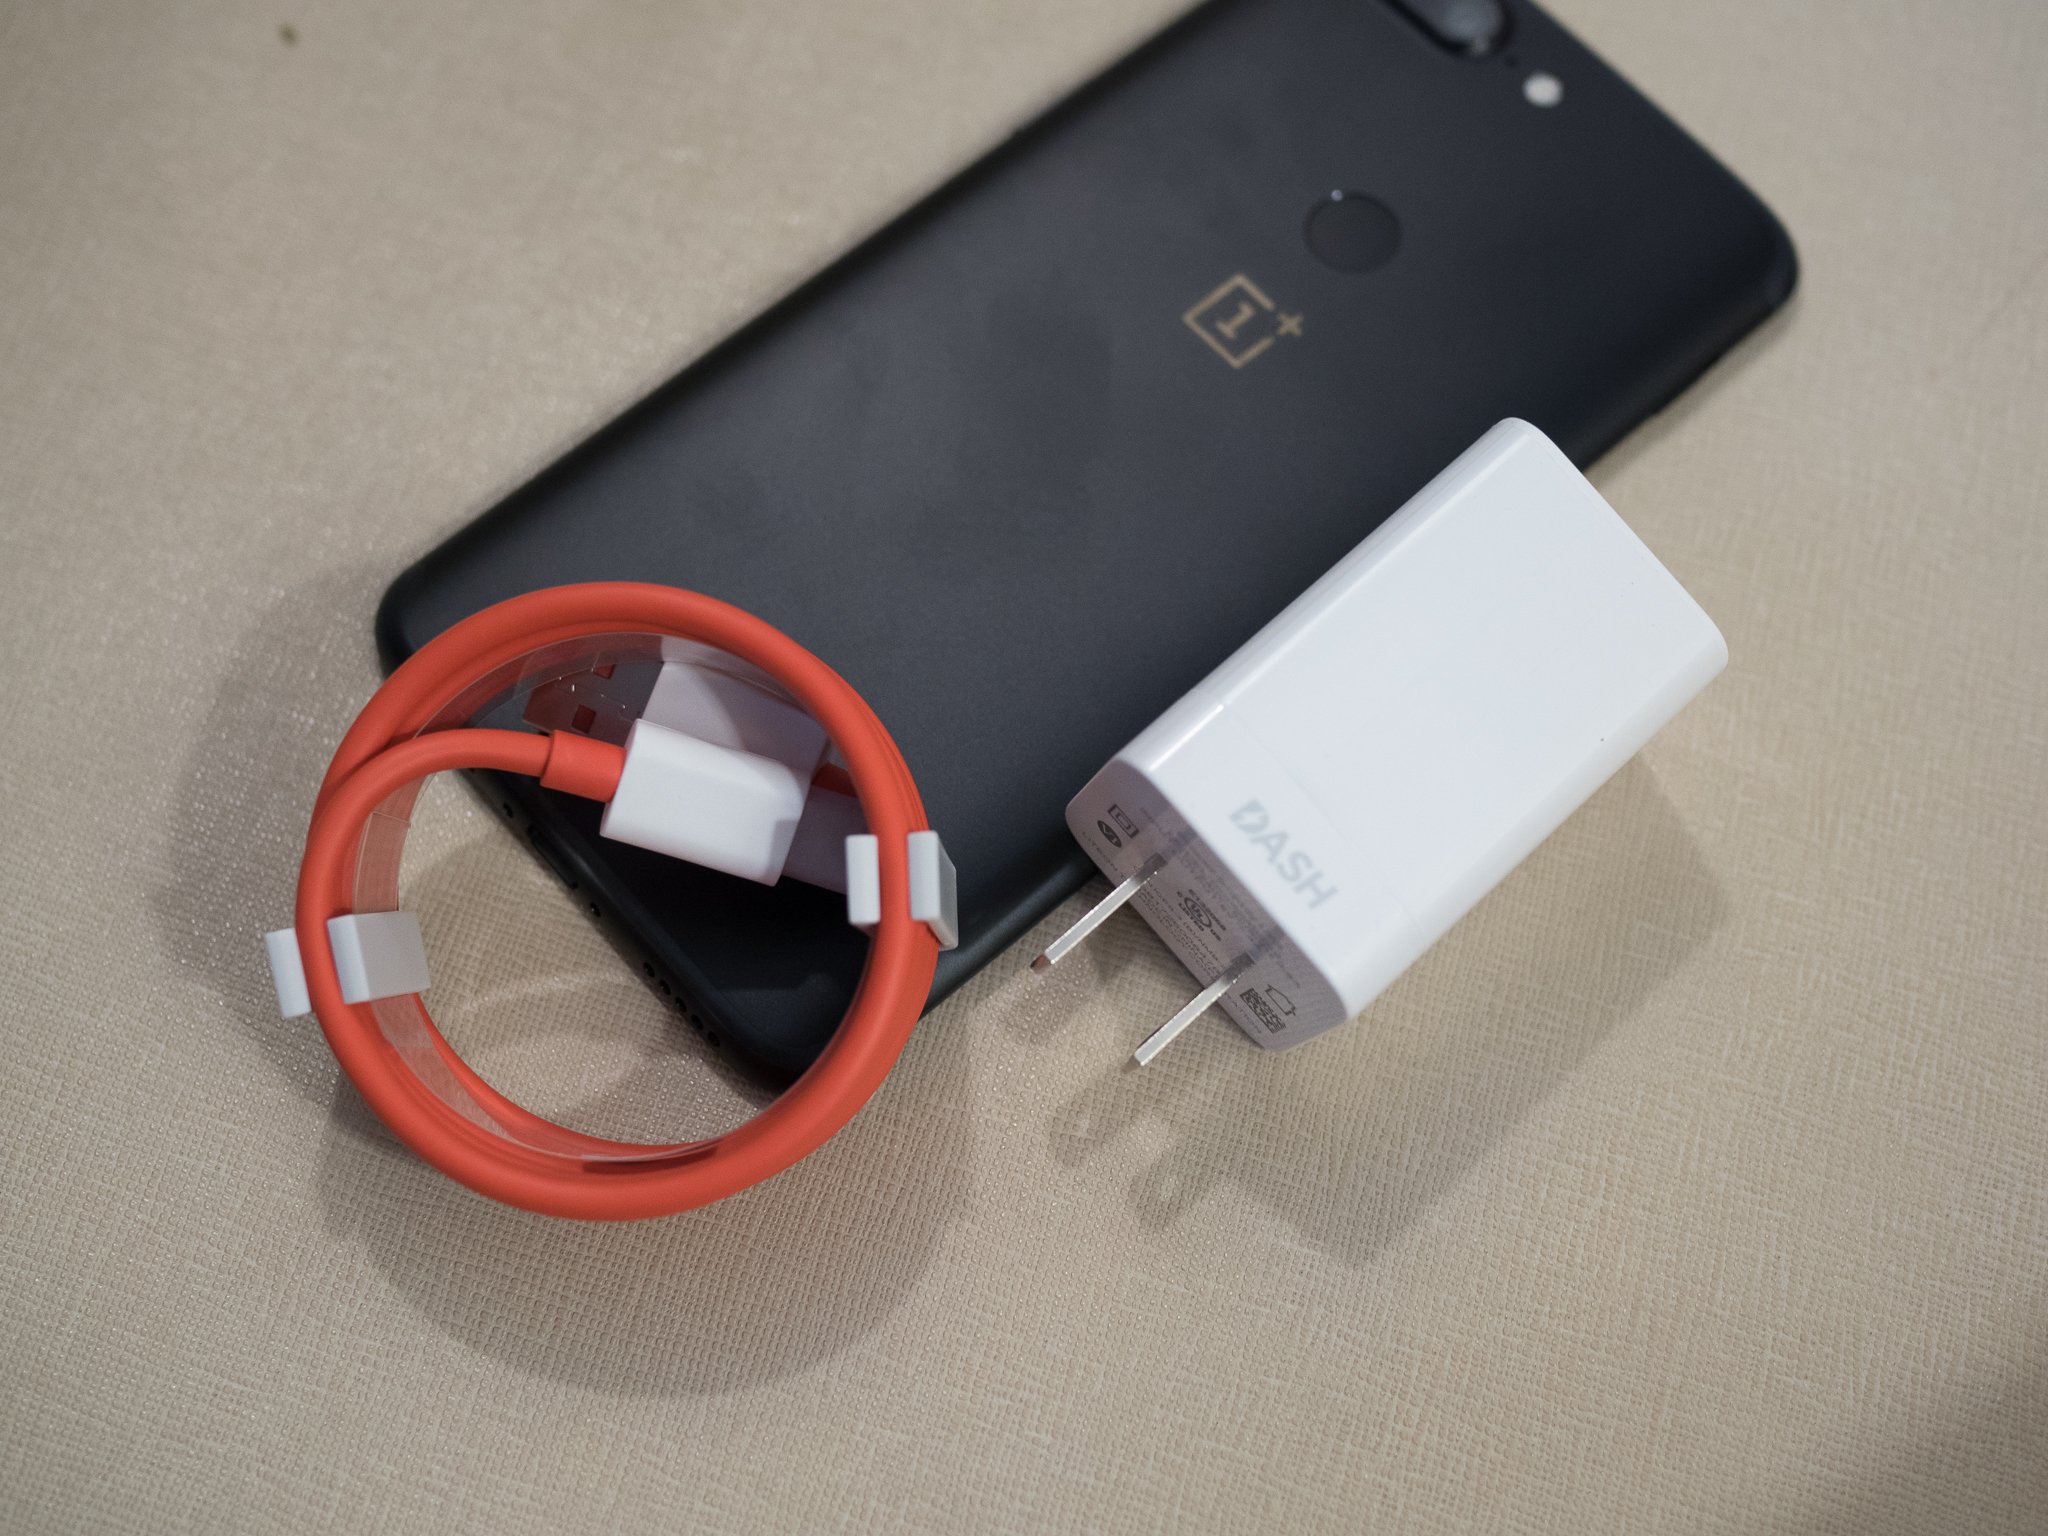 OnePlus 5T Dash Charger